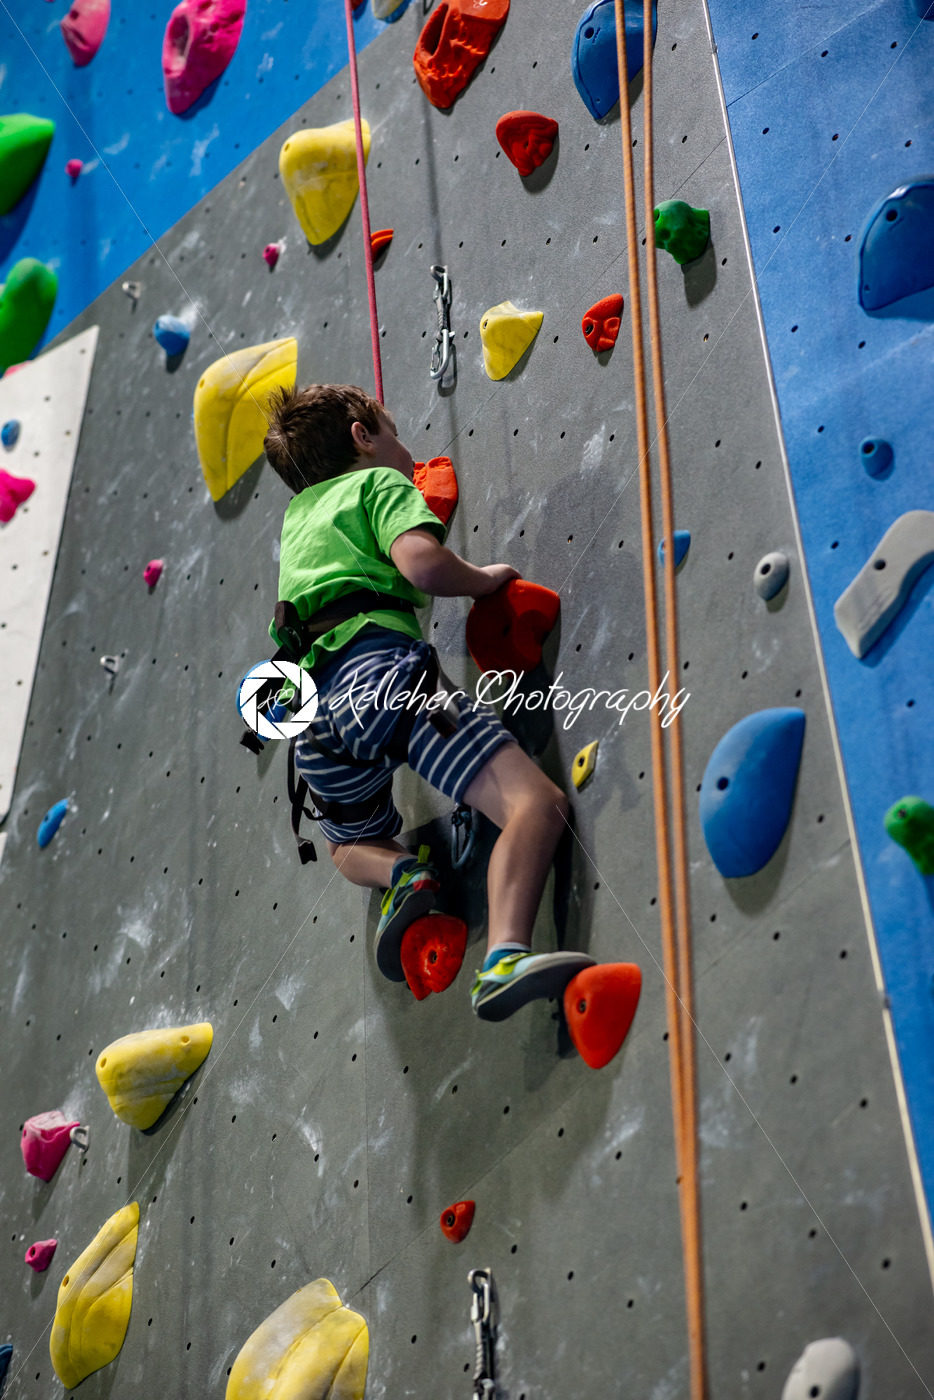 Young boy climbing up on practice wall in indoor rock gym - Kelleher Photography Store